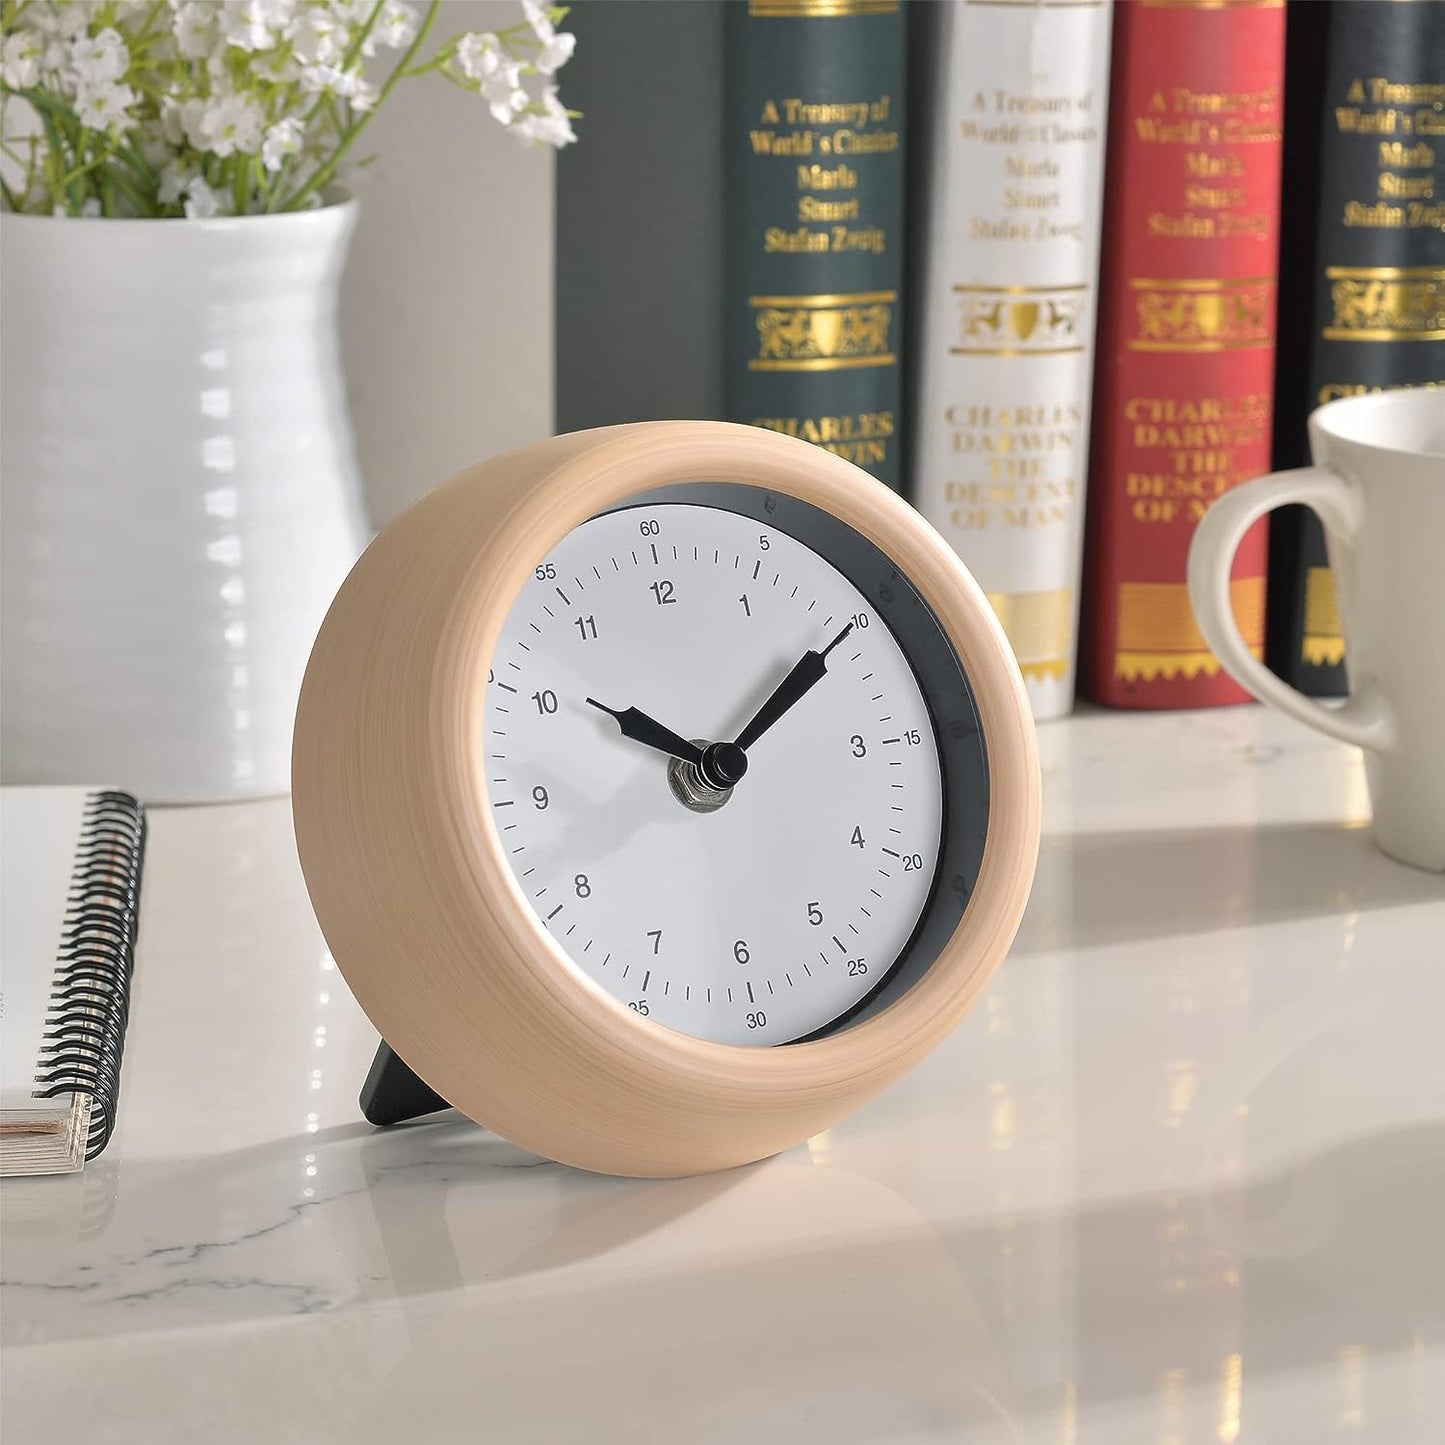 5 Inch Alarm Clock Non-Ticking Silent Clock Battery Operated, Elegant Wooden Wall Clocks Decorative for Bedroom, Bedside, Desk